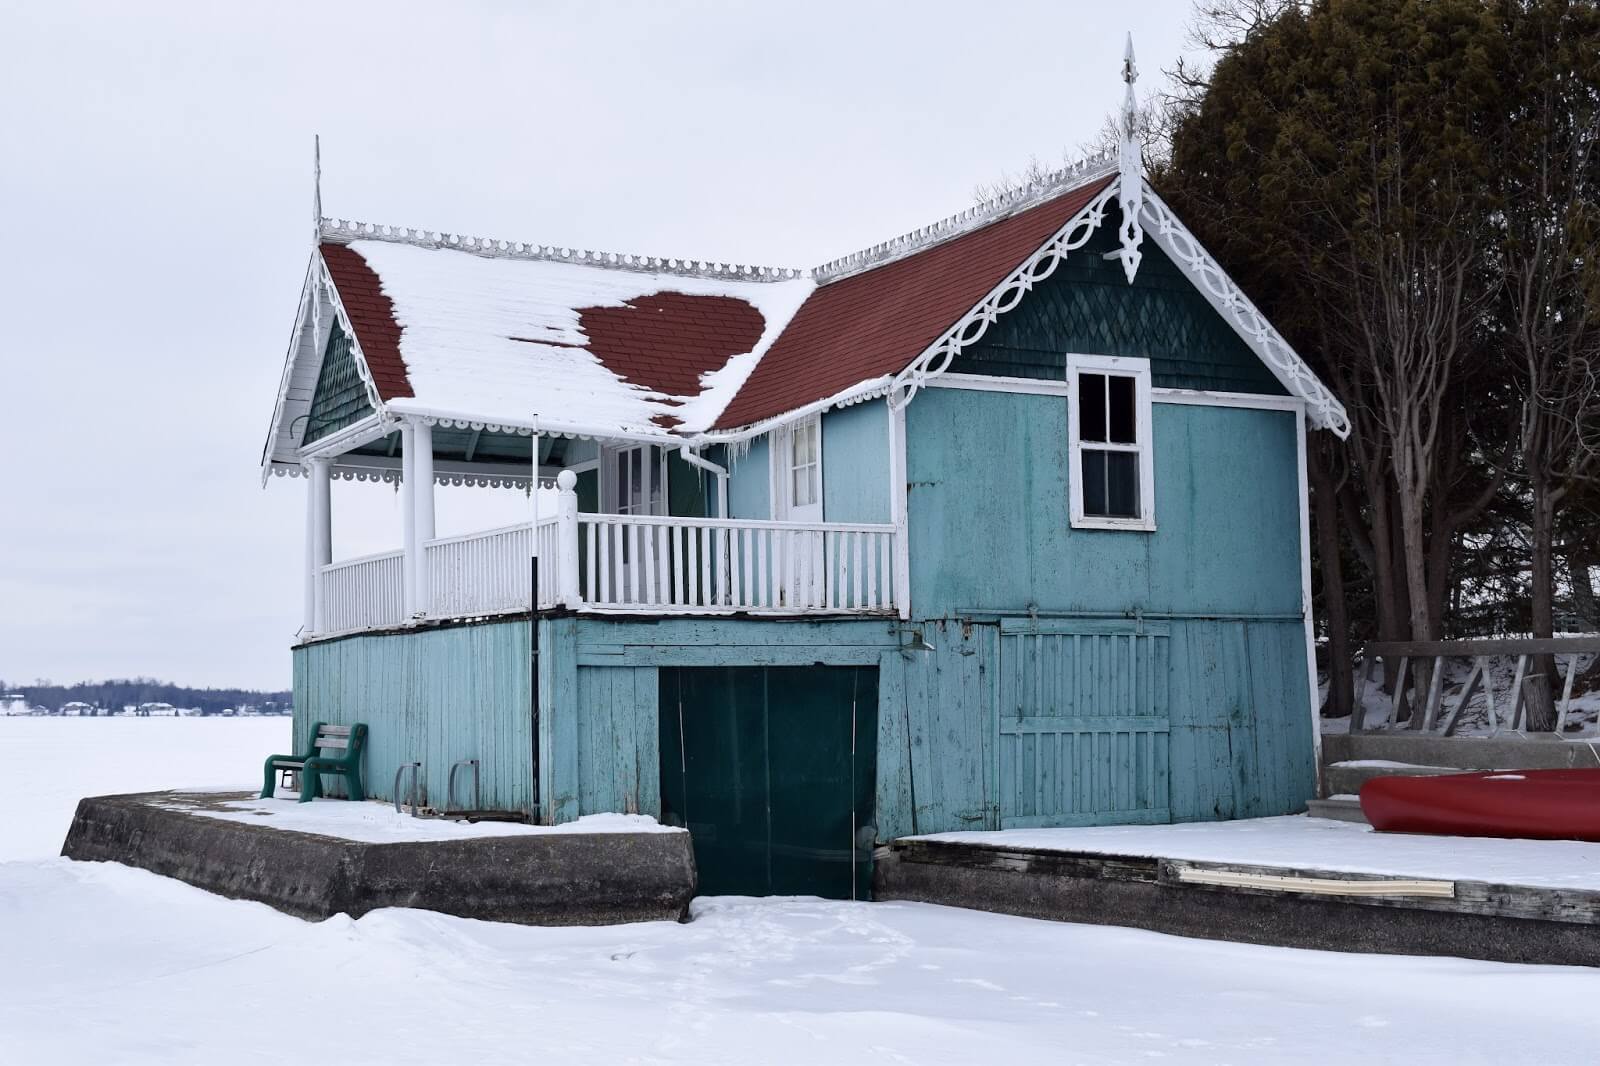 A two-storey boat wooden boathouse with decorative roof finishes painted blue with red shingles and white trim in the winter